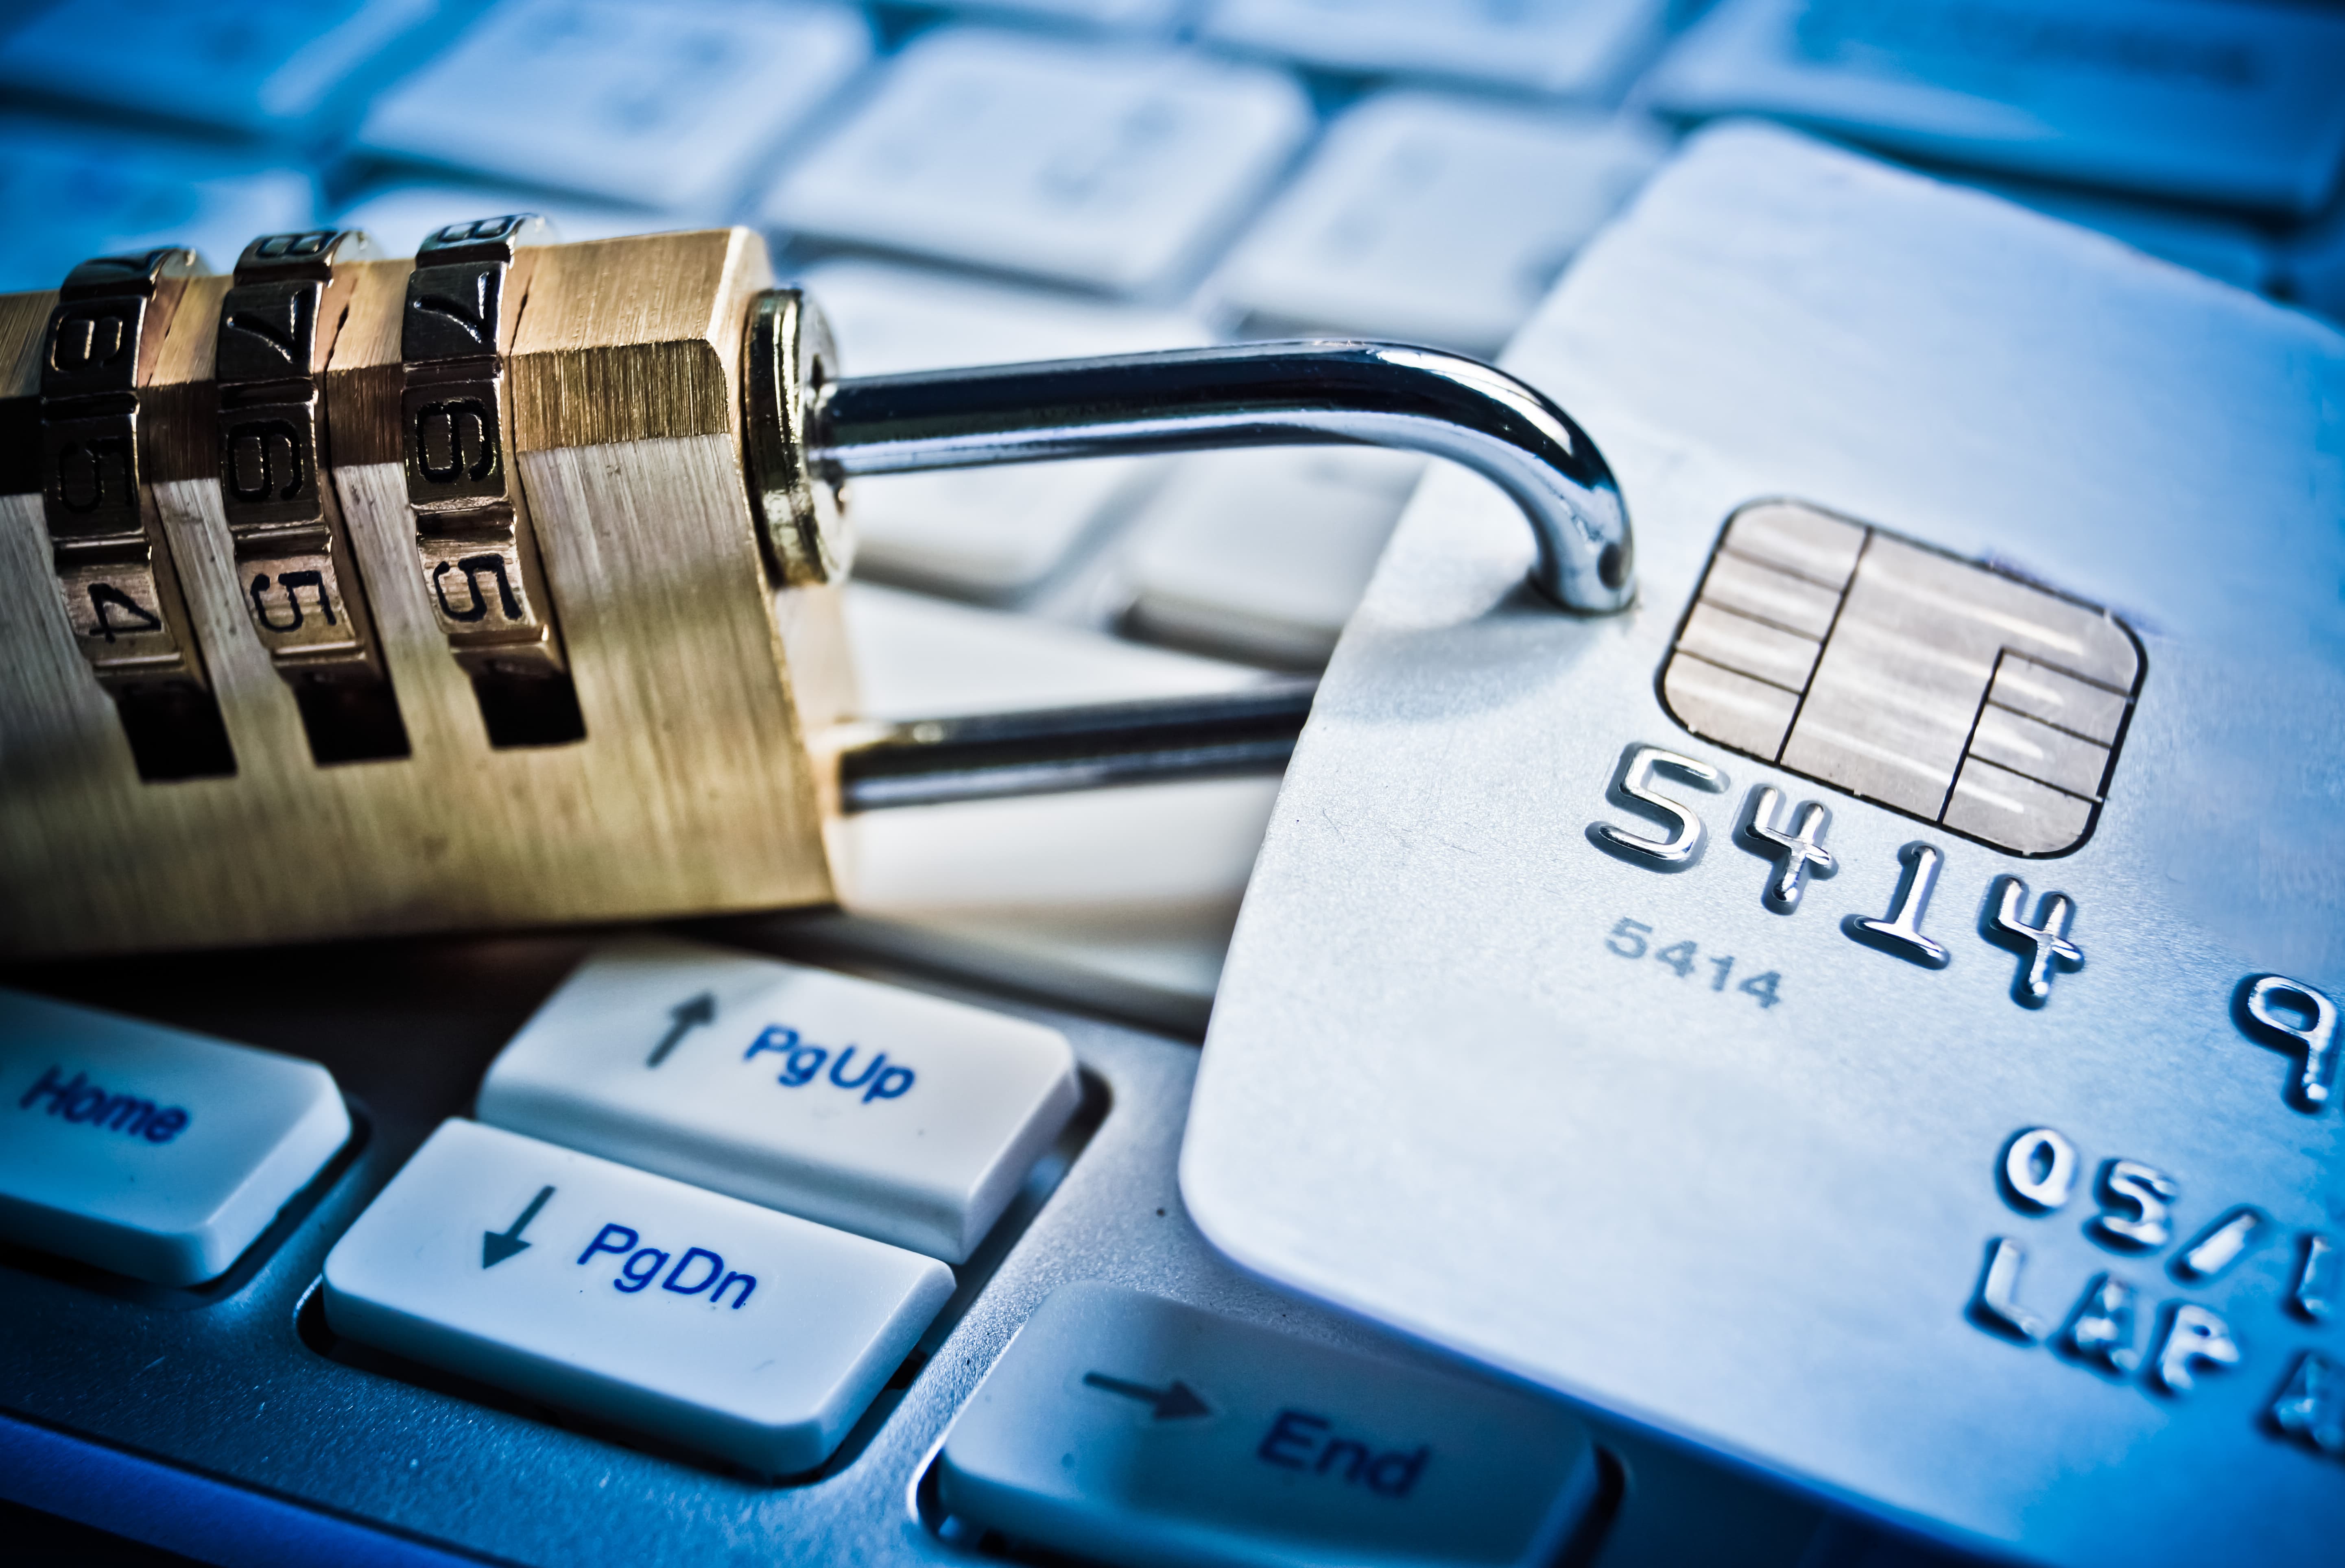 Two Secrets to Fighting Company Card Fraud